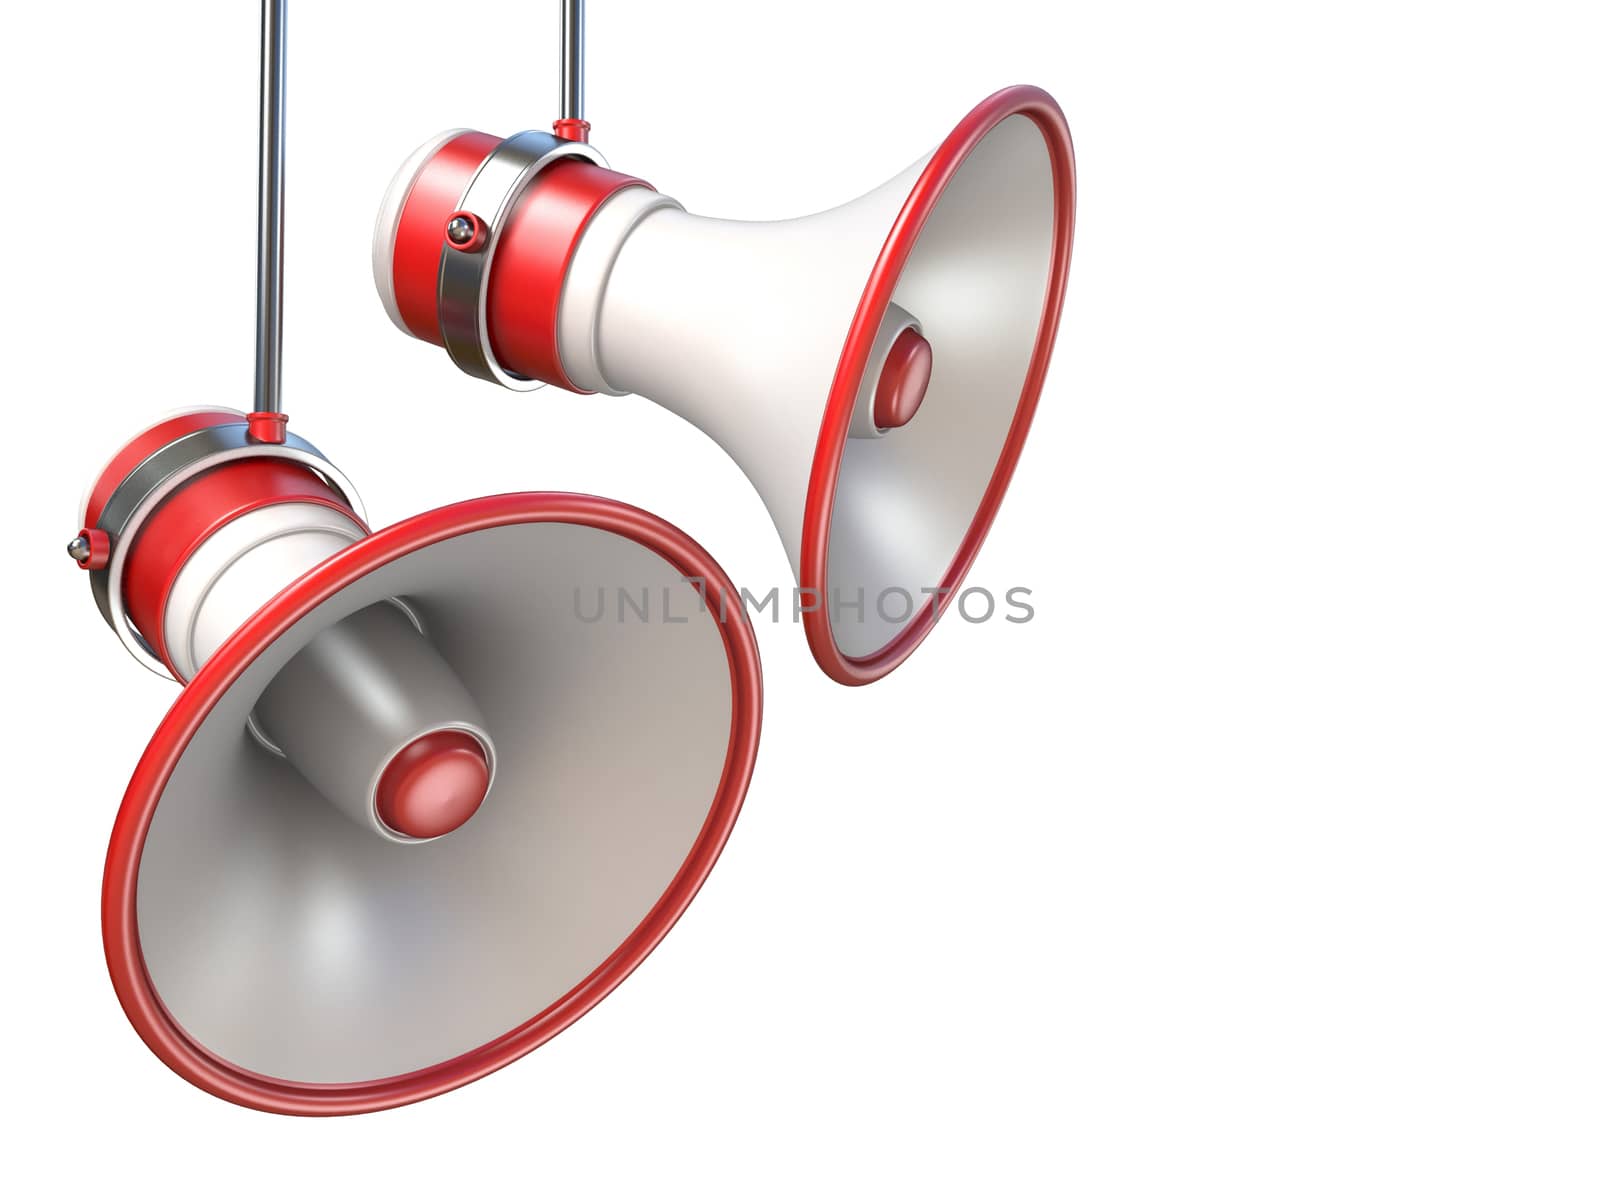 Two red and white megaphones 3D render illustration isolated on white background